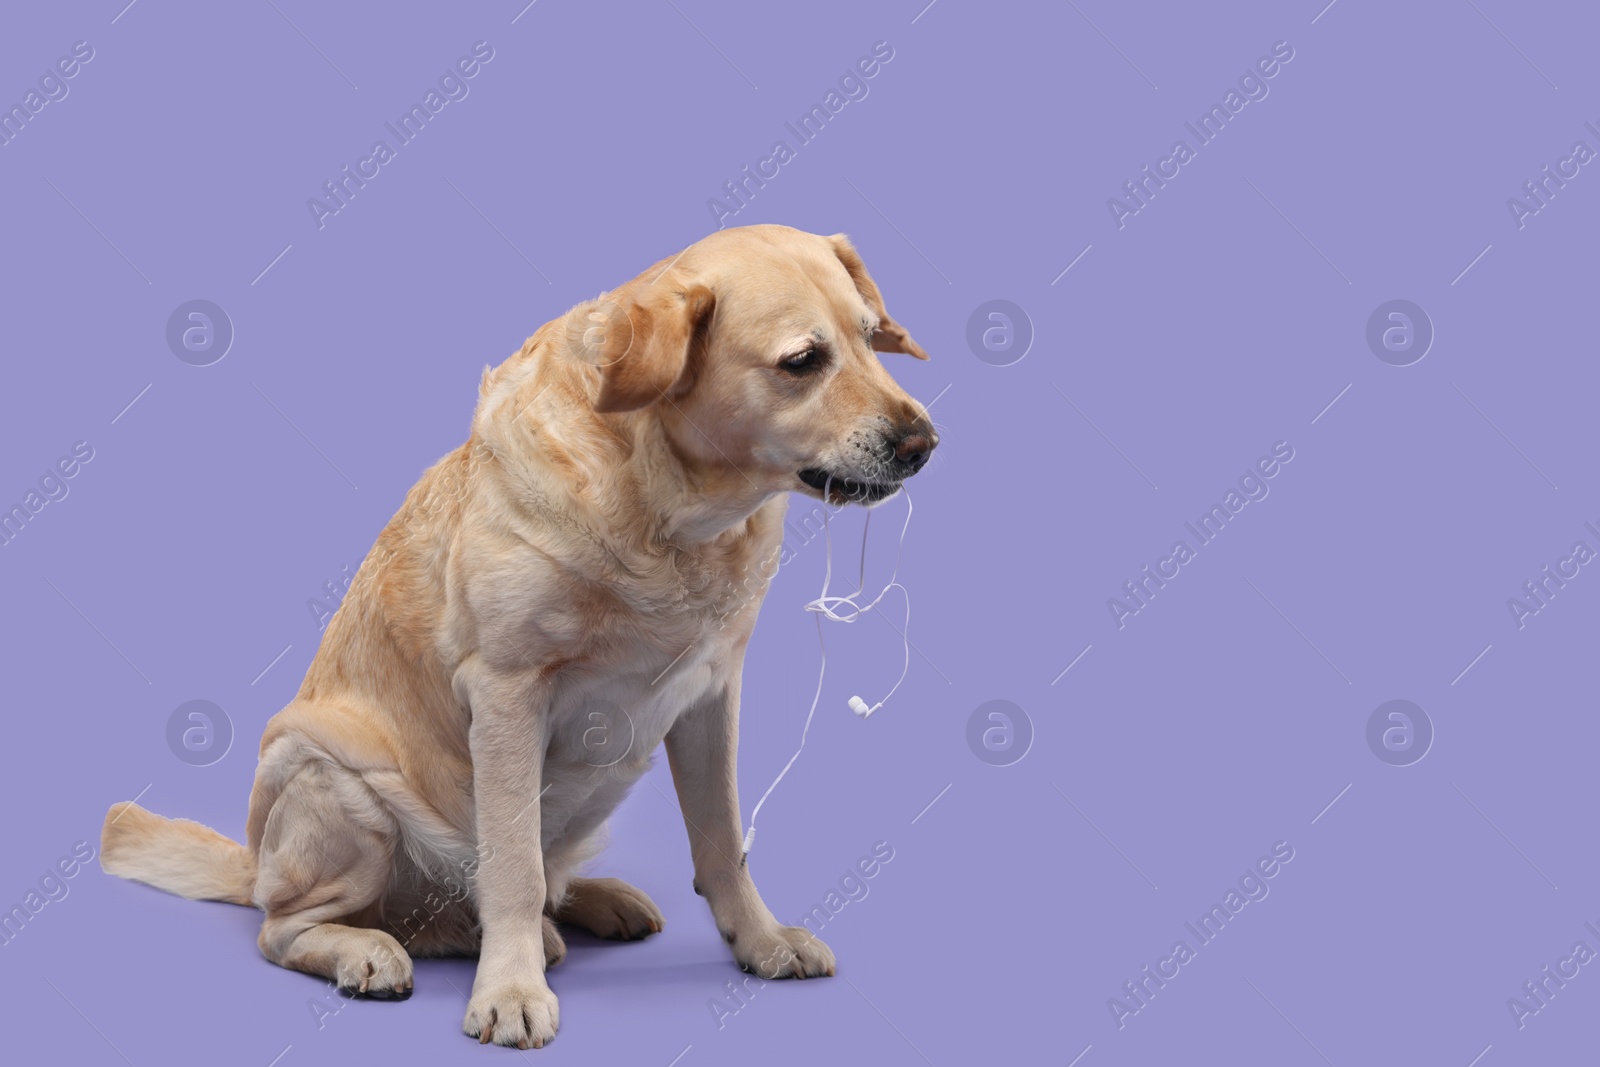 Photo of Naughty Labrador Retriever dog chewing wired headphones on purple background. Space for text